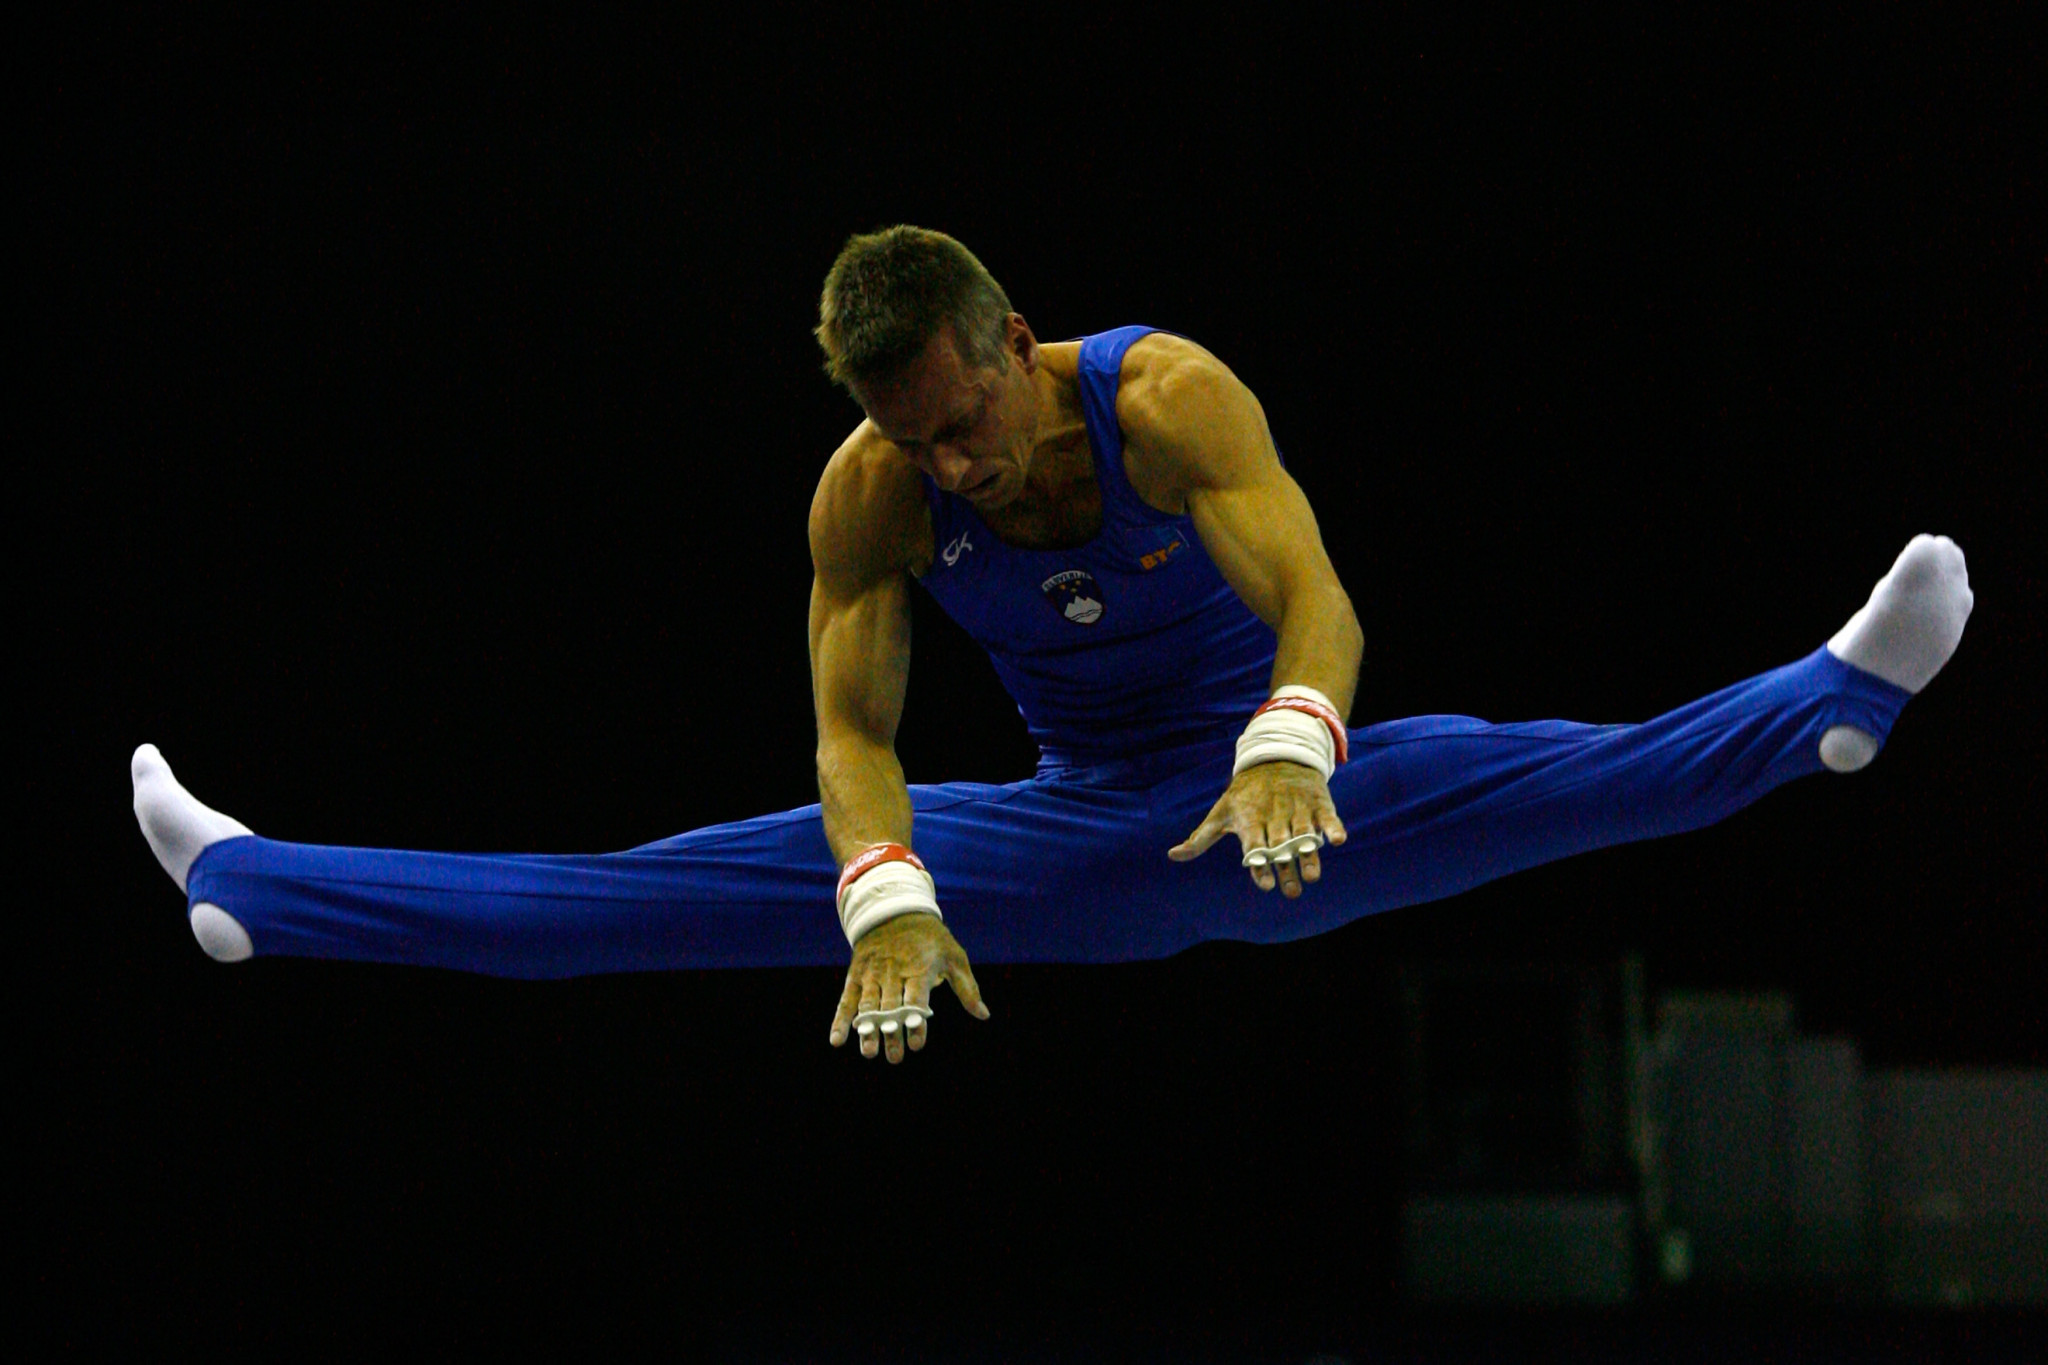 Aljaž Pegan won gold on the horizontal bar at the 2005 World Artistic Gymnasics Championships in Melbourne ©Getty Images